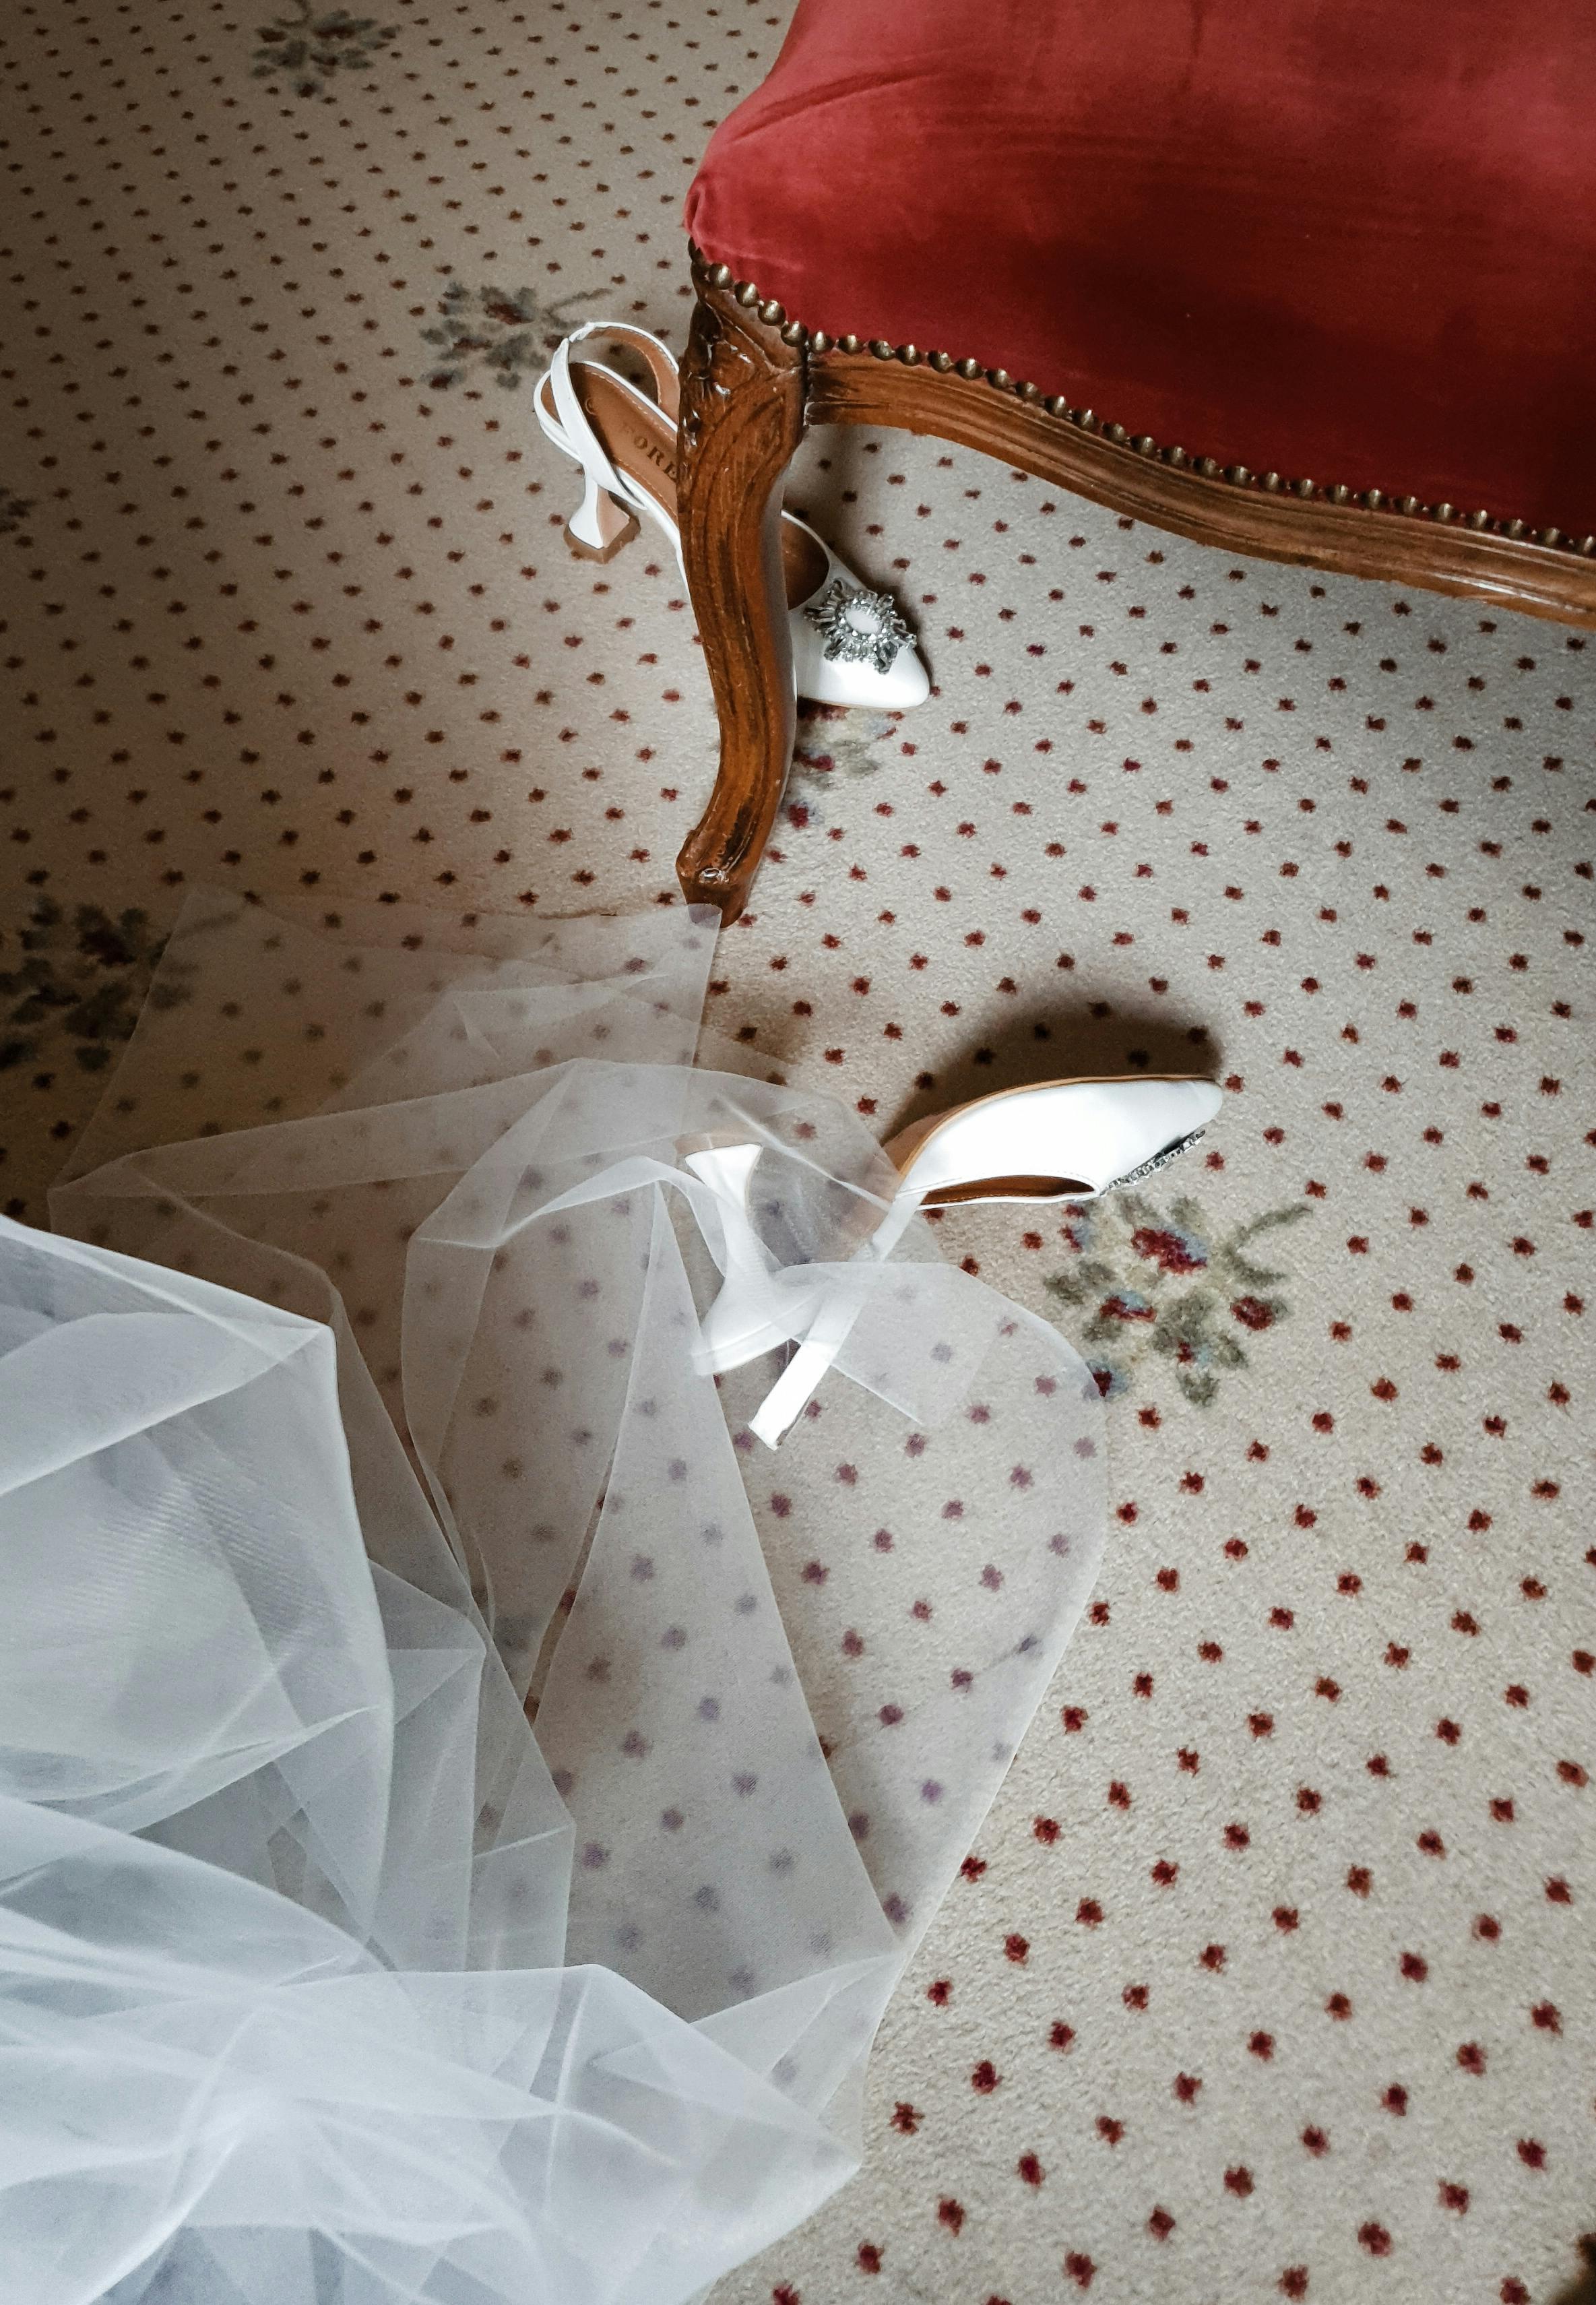 A wedding dress and shoes on the floor | Source: Pexels